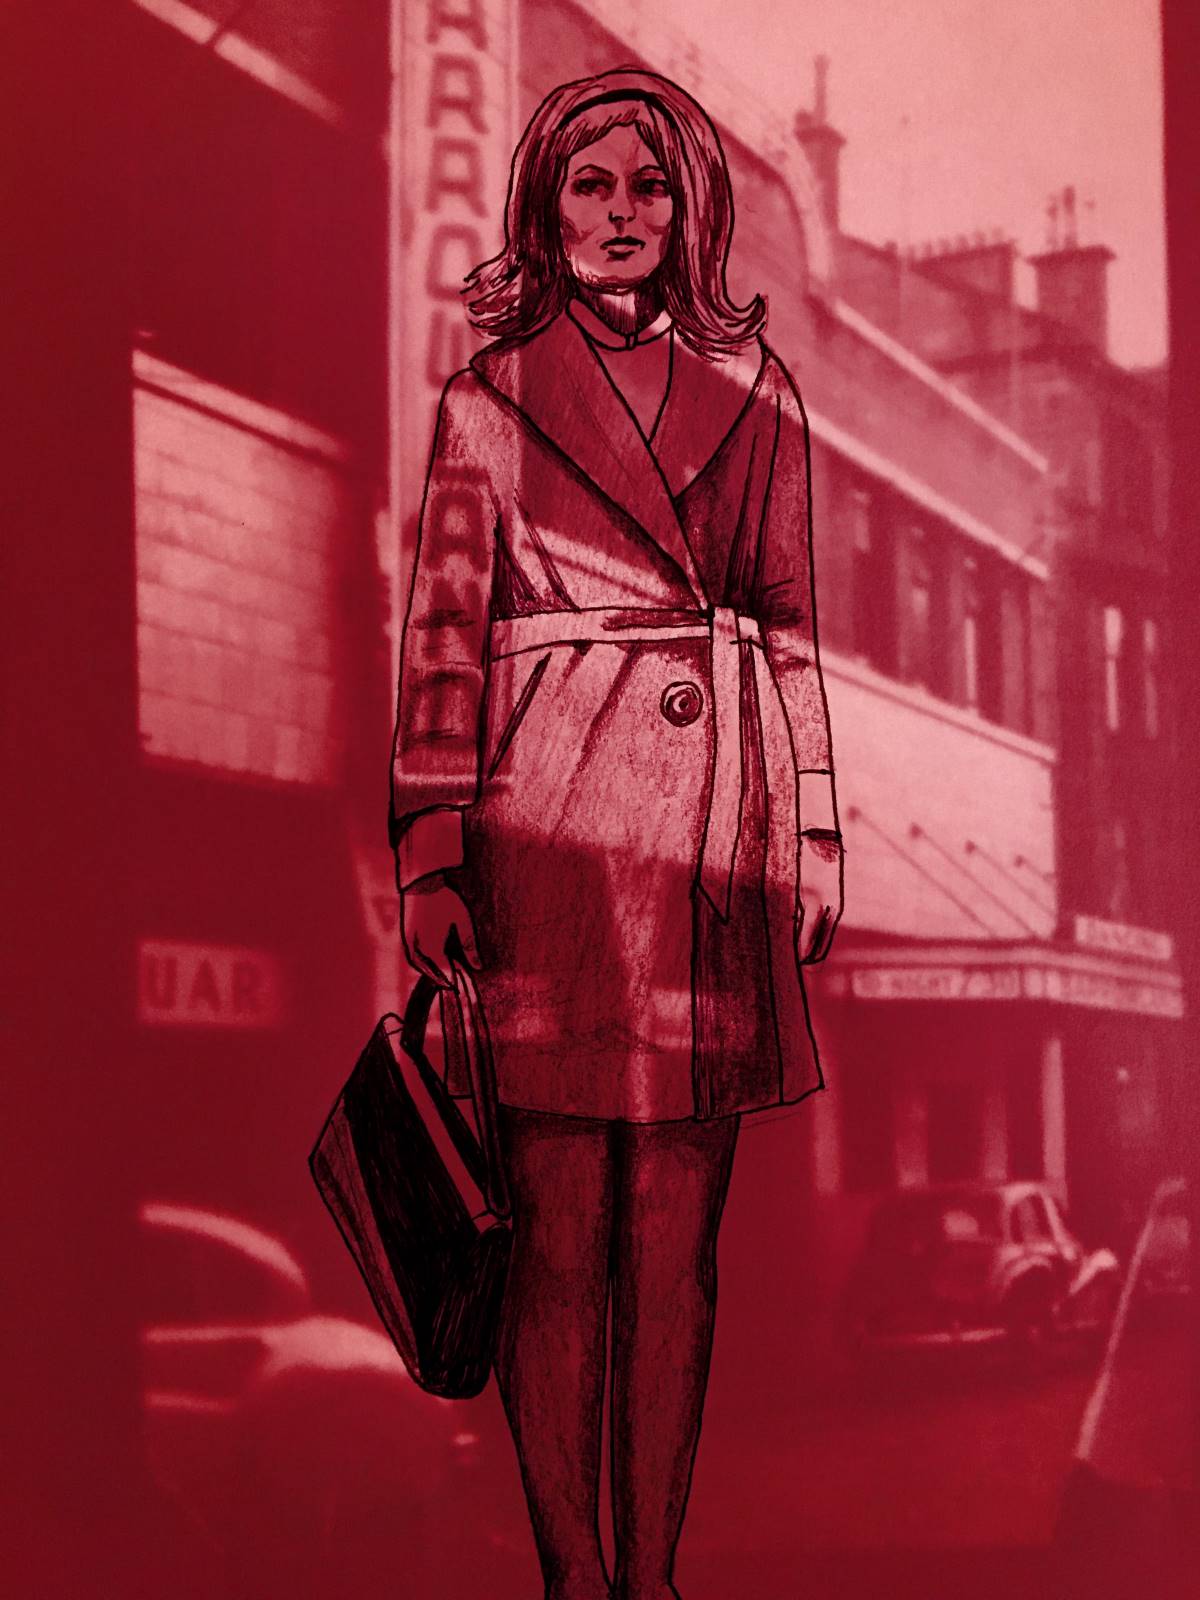 drawing of a woman holding a handbag standing in front of a building